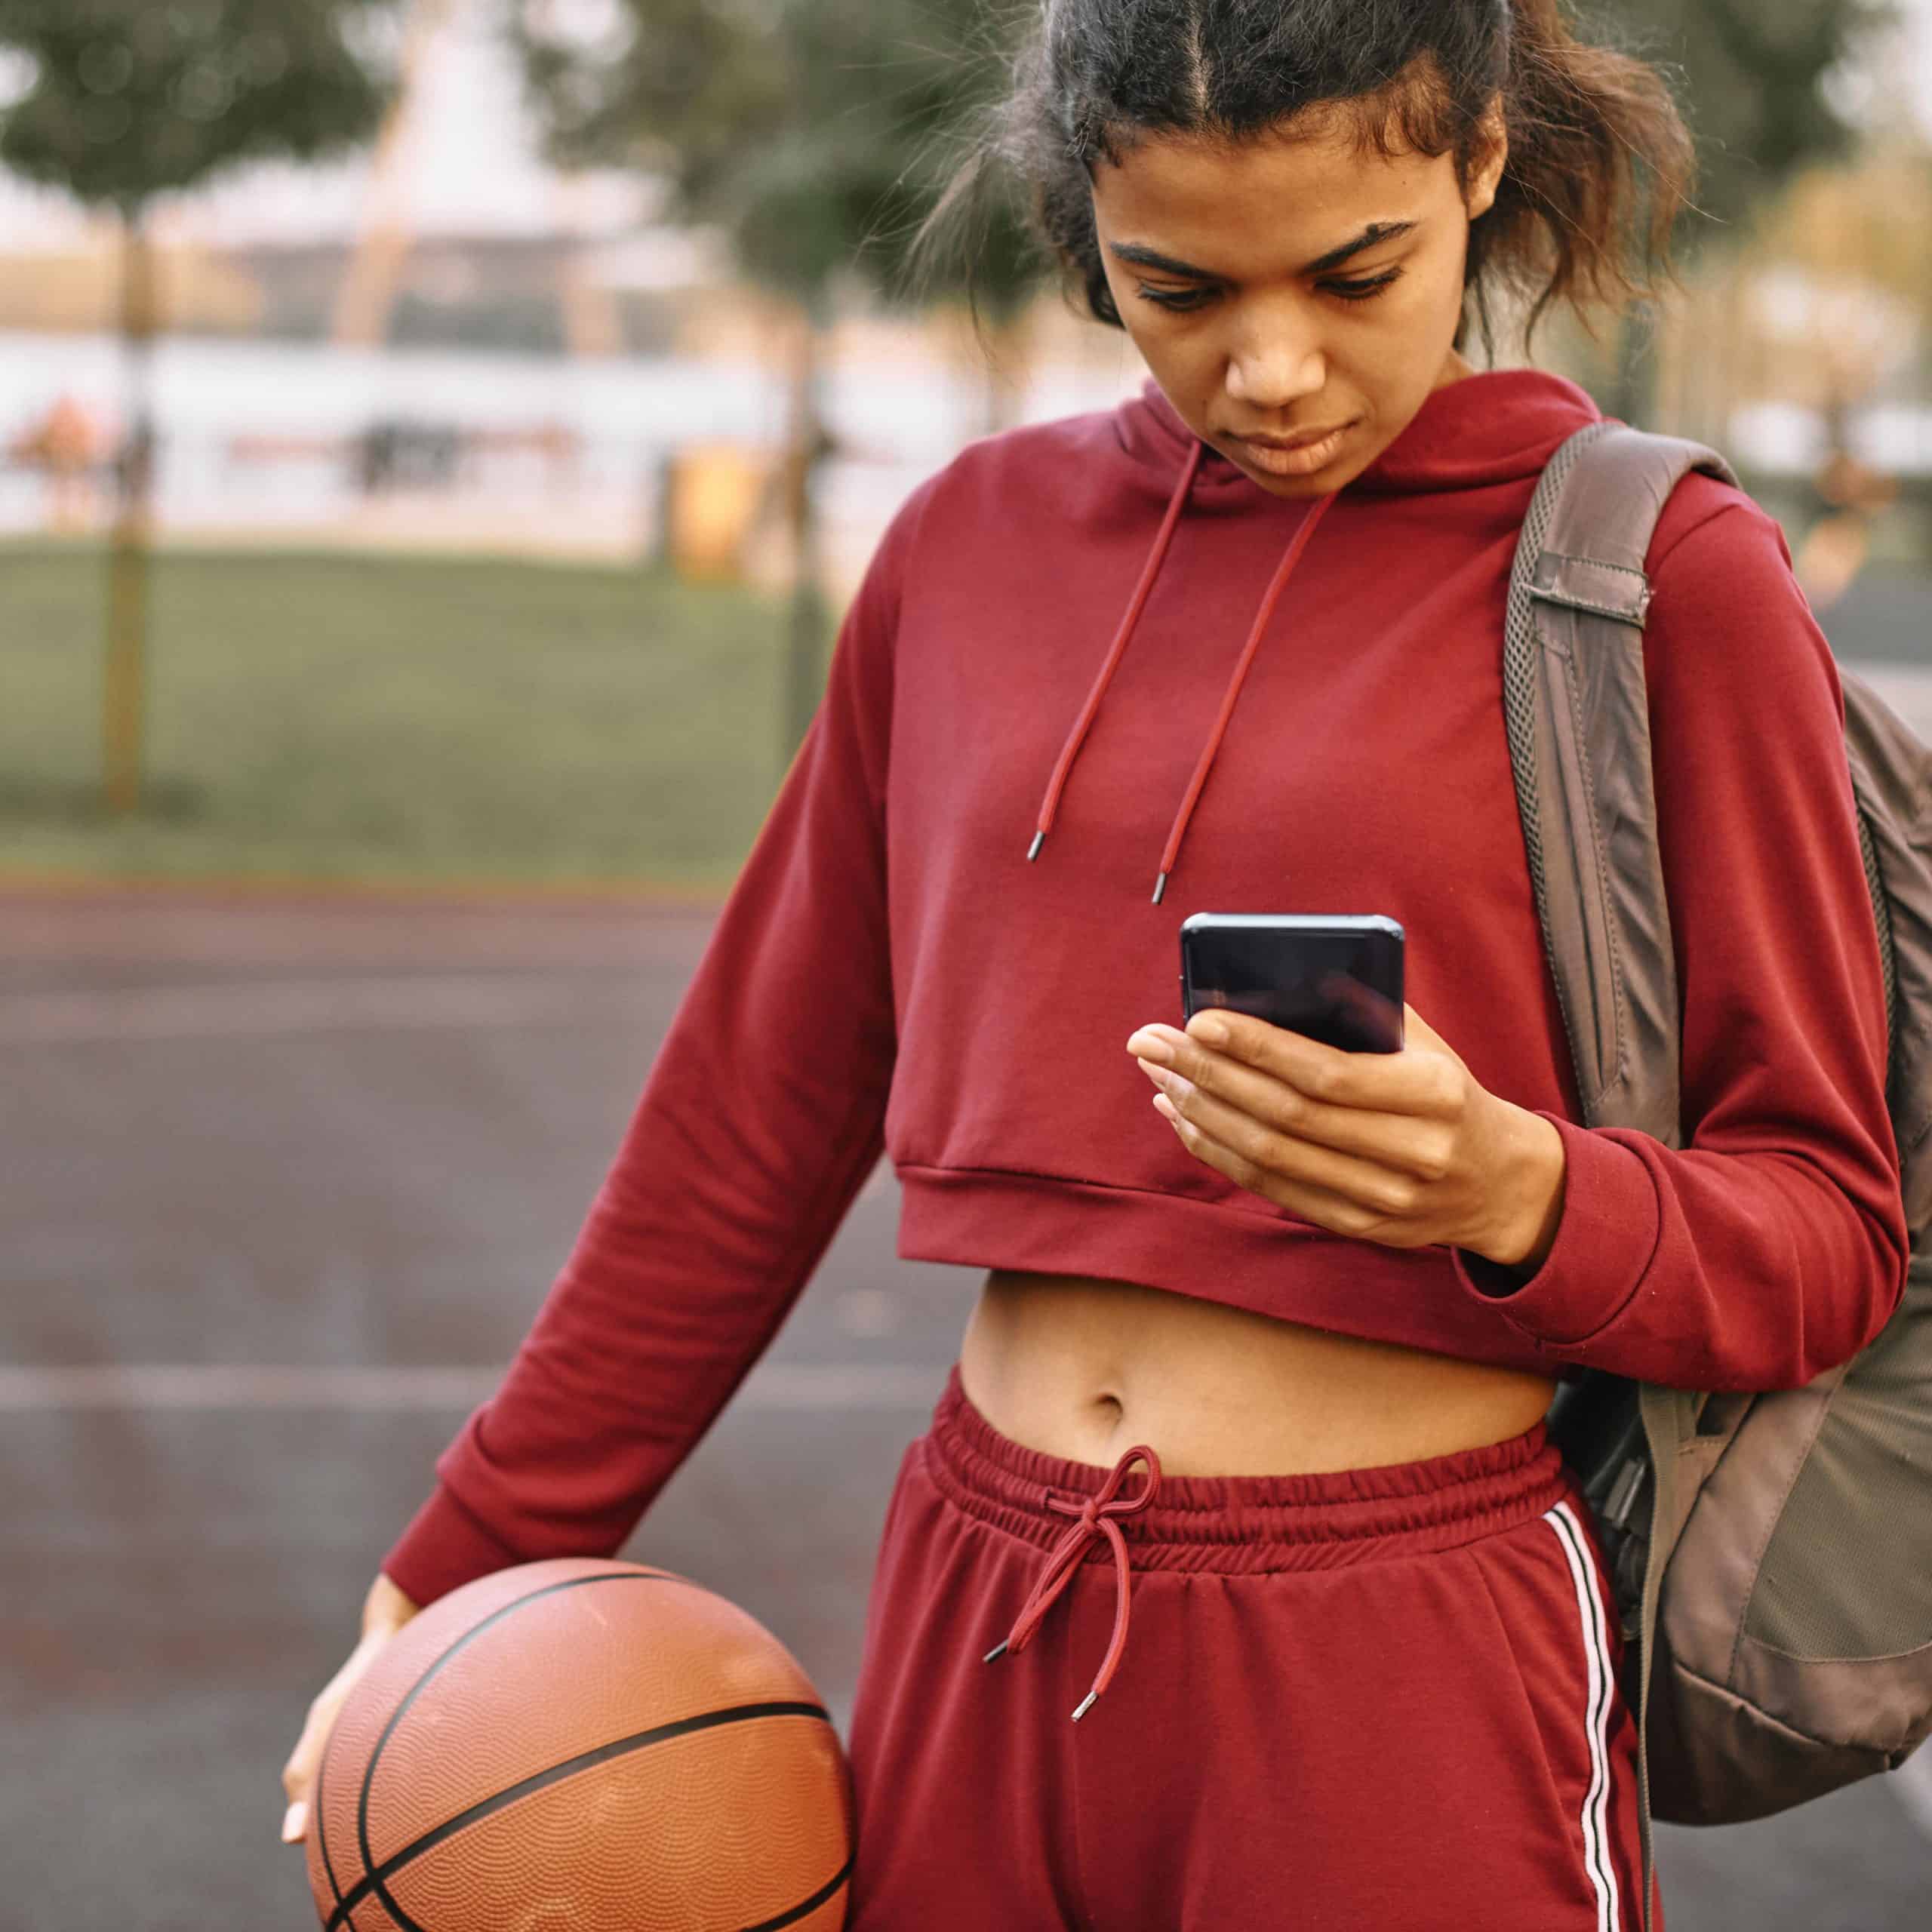 Sporting Apps to have on your phone